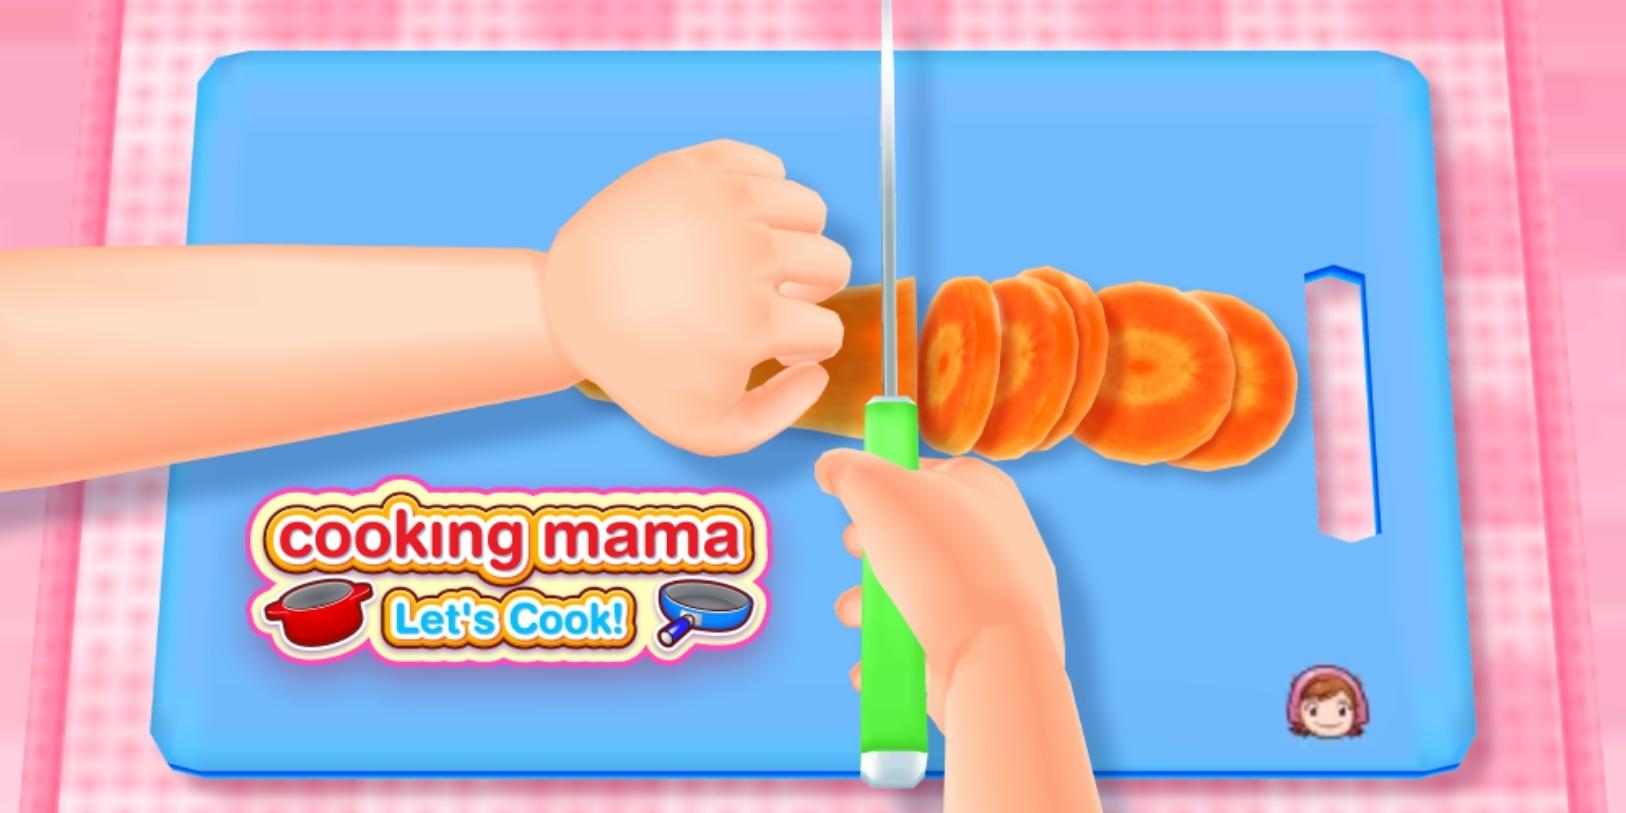 Cooking Mama MOD Apk v1.83.0 (Unlimited Money)